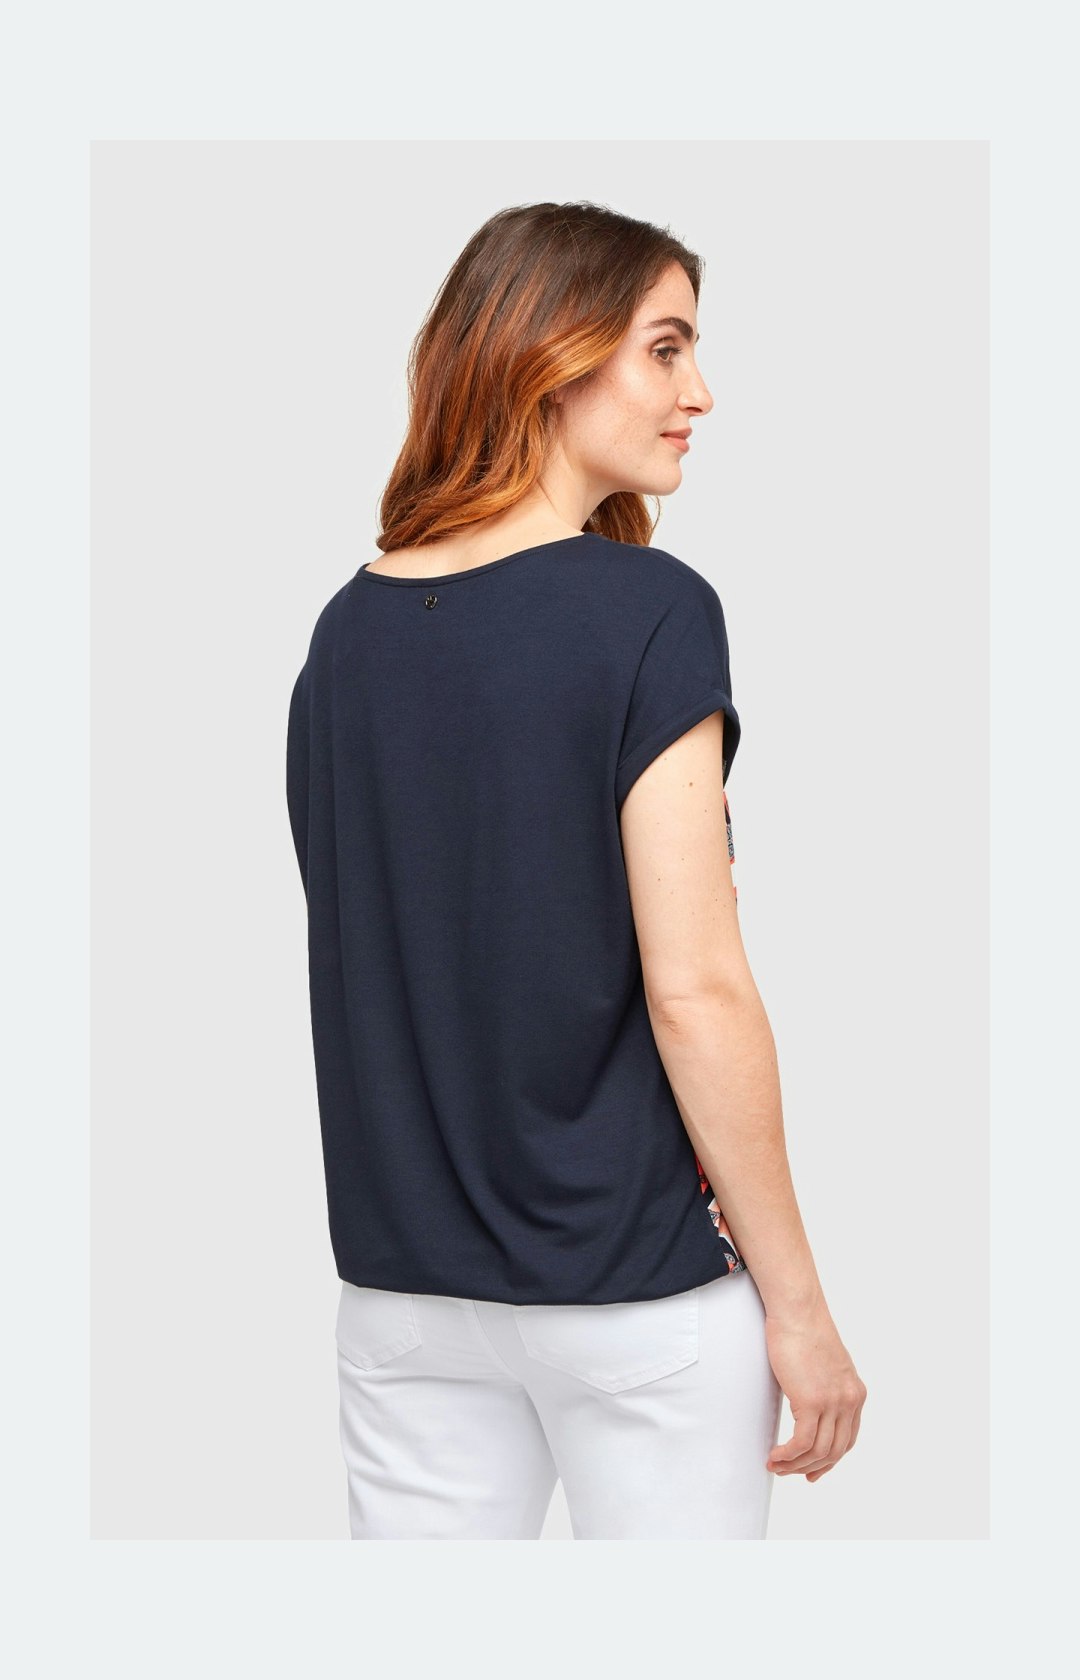 T-Shirt mit Allover-Muster